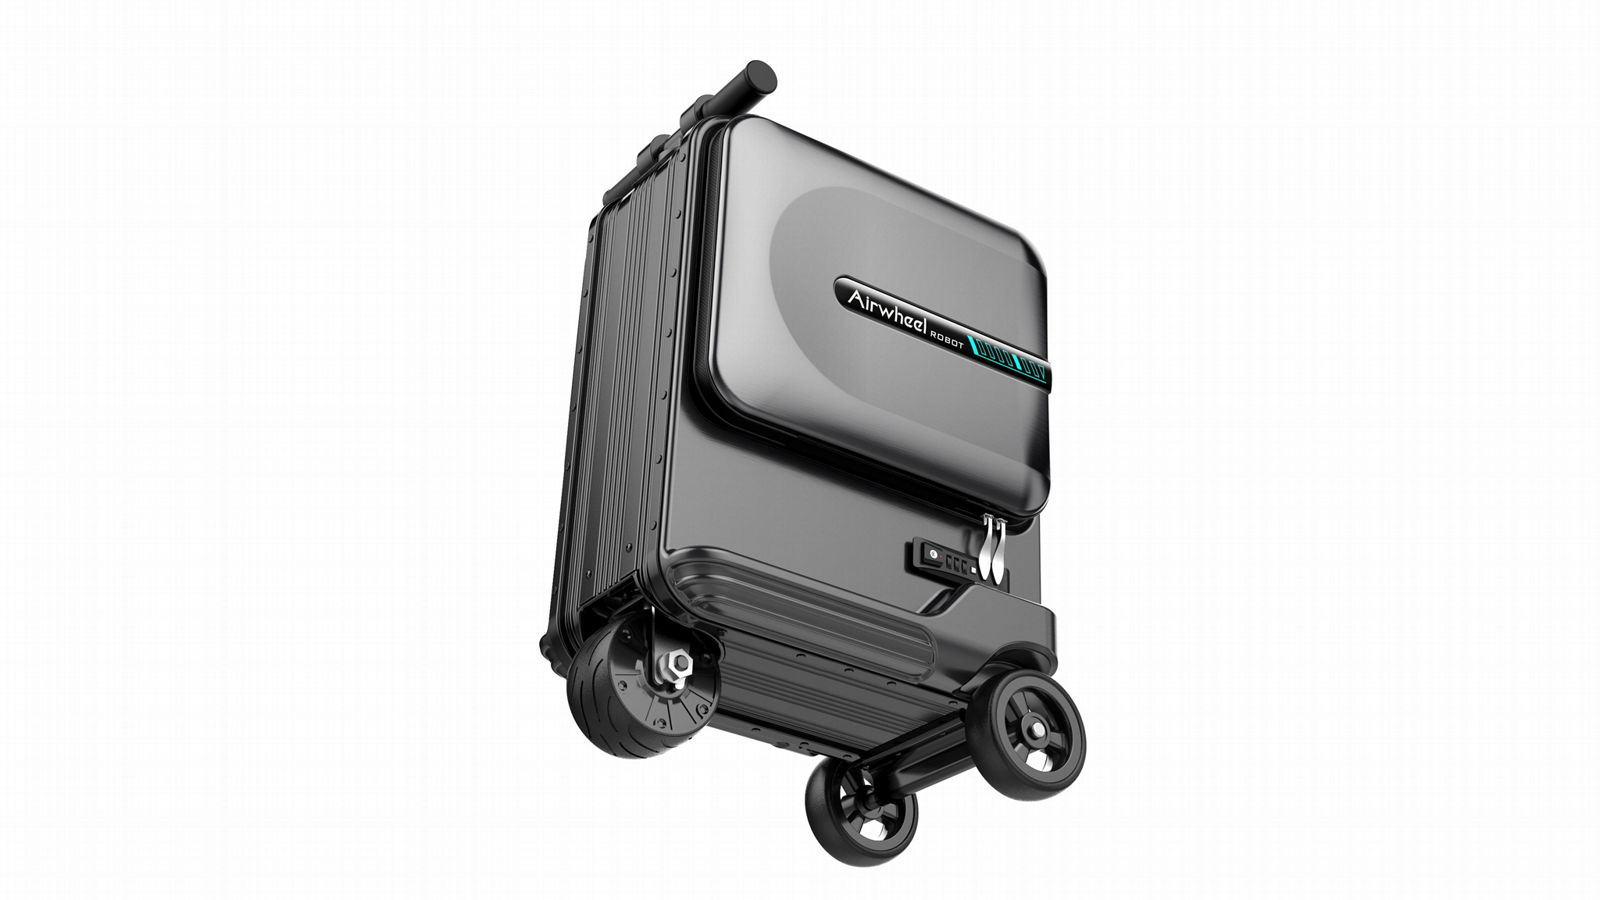  Airwheel SE3Mini rideable carry-on smart electric l   age 5